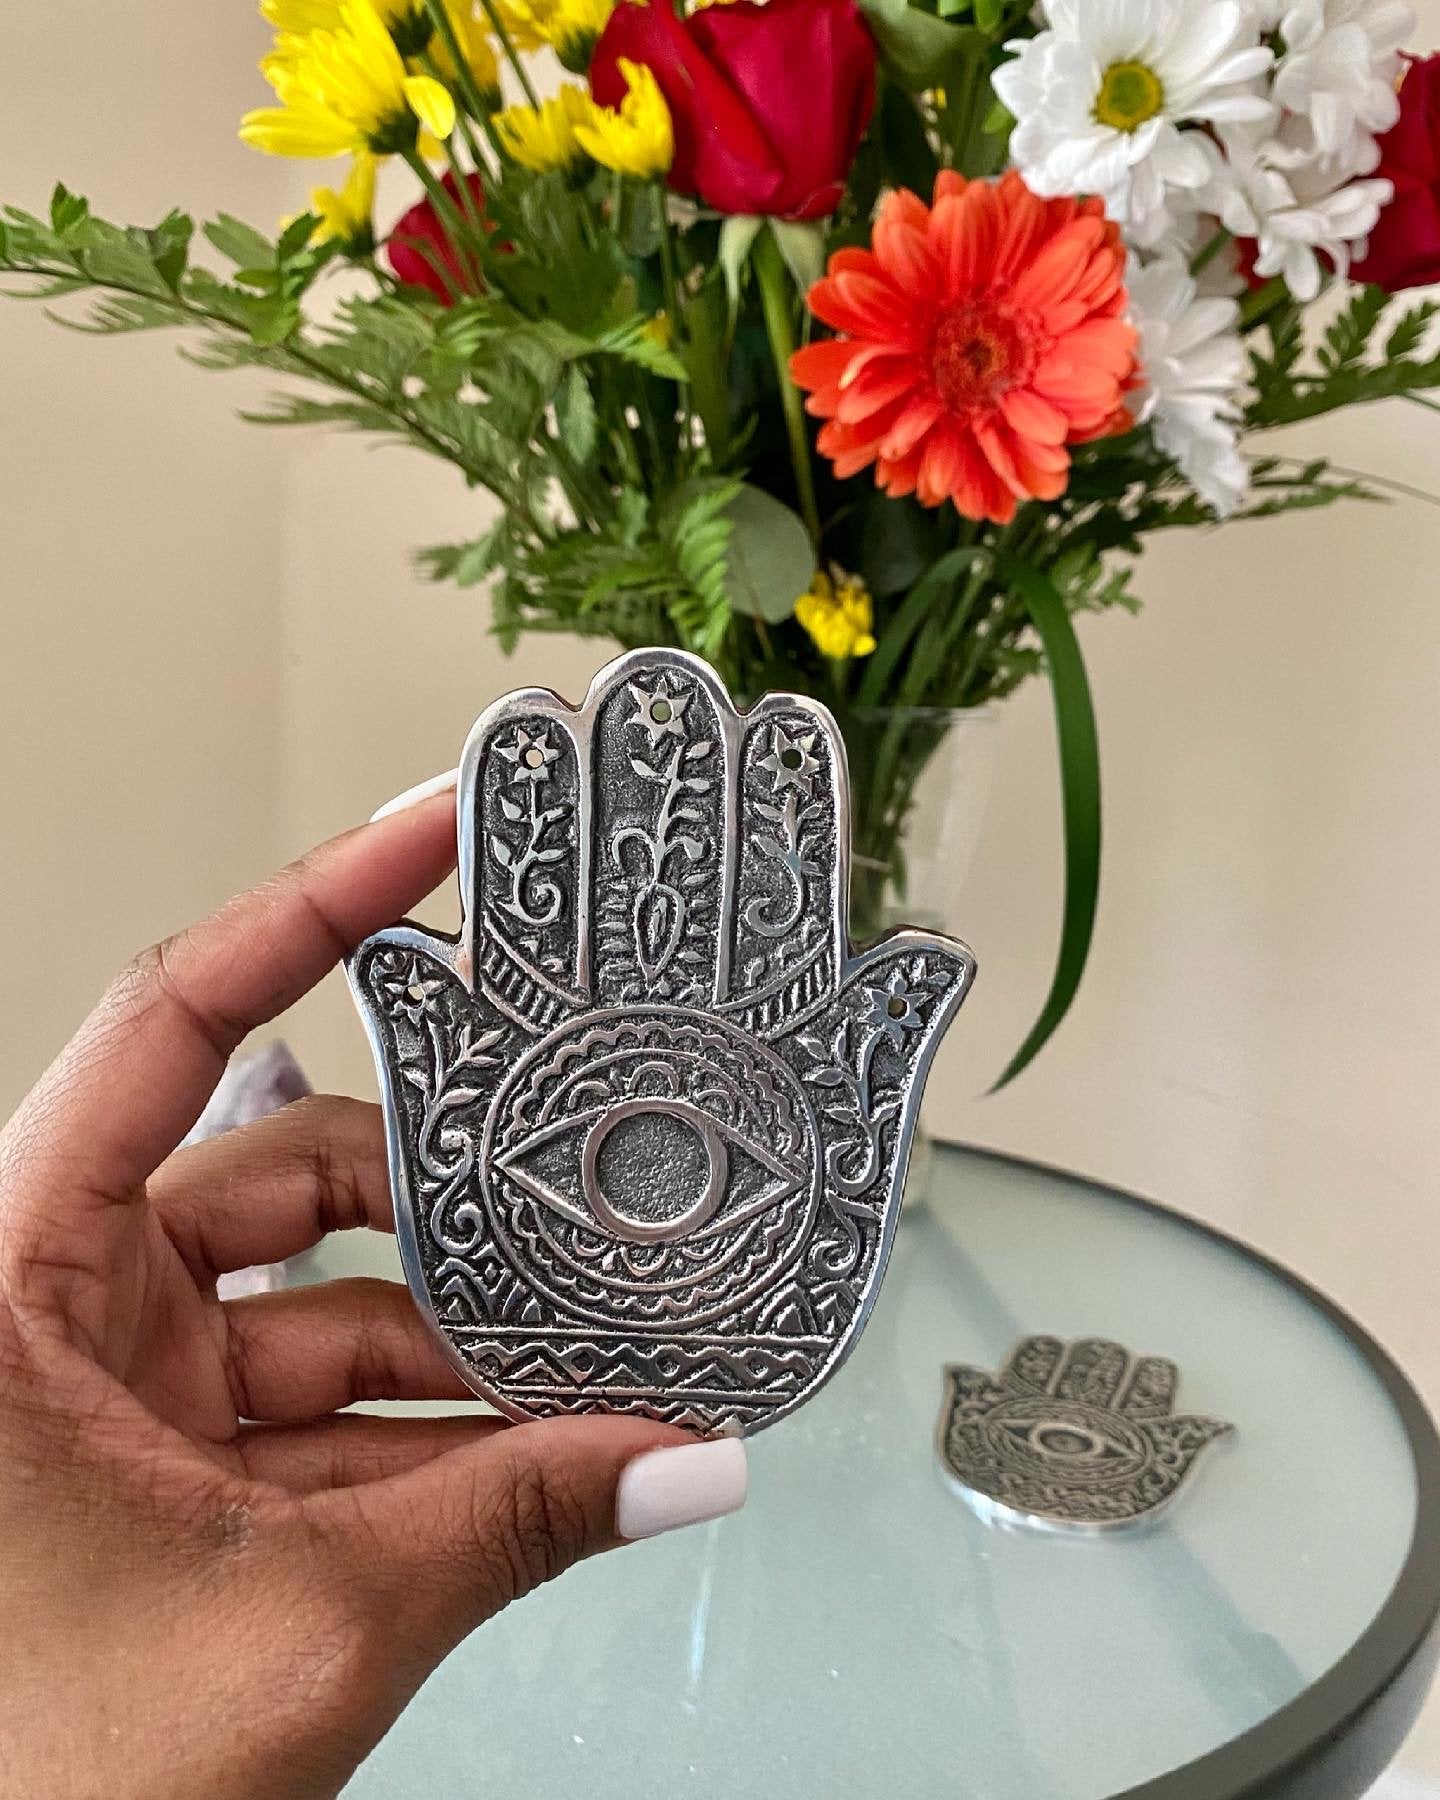 After you grab a box of our aromatic incense, snag this beautiful metal Hamsa Hand Incense burner! No need to let incense ash hit the floor.   Listing is for one Hasma Hand Incense (Agarbatti) Burner. 